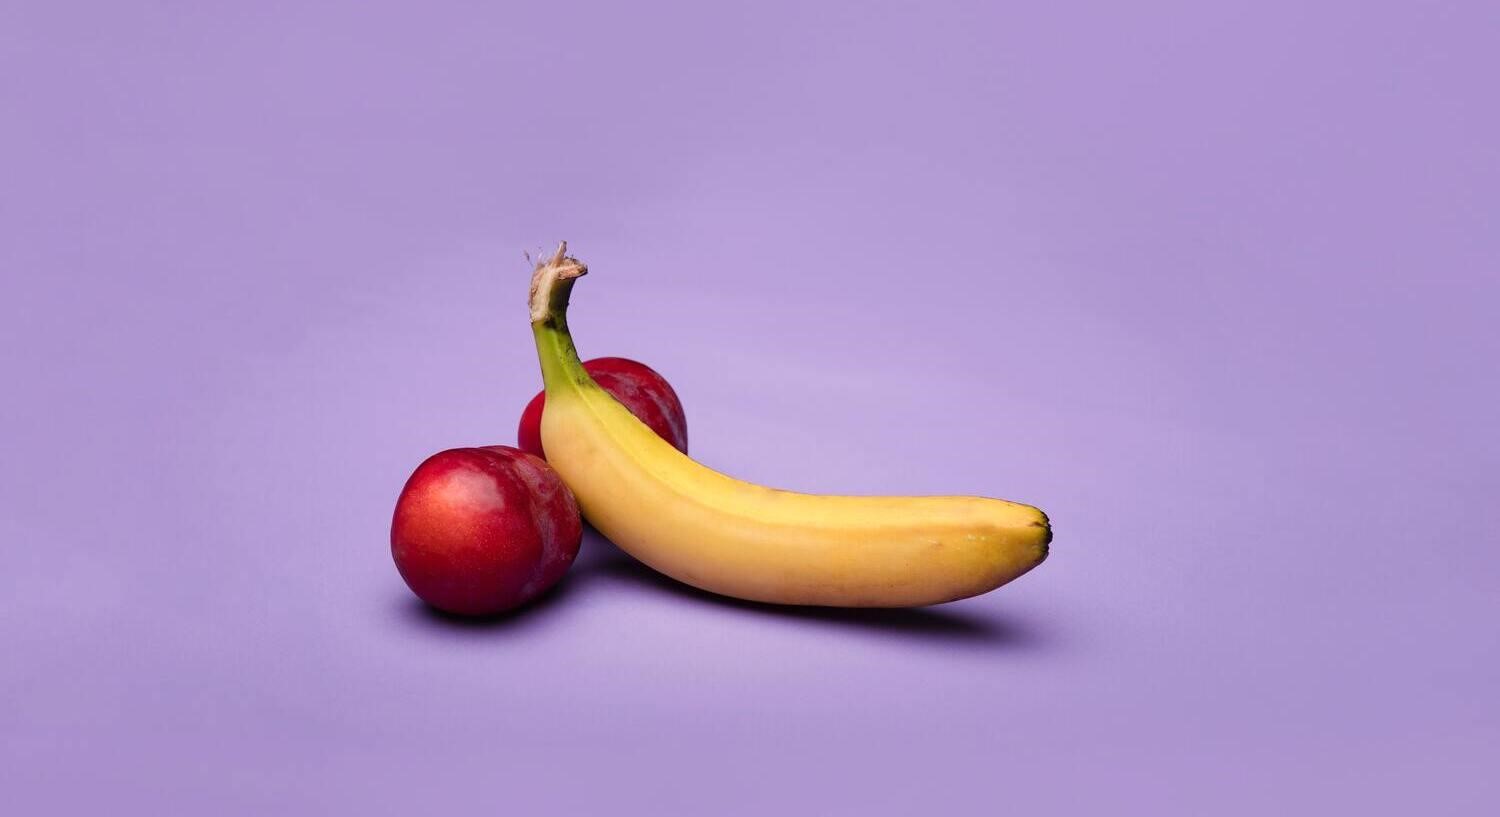 Banana and Plums arranged as a Penis